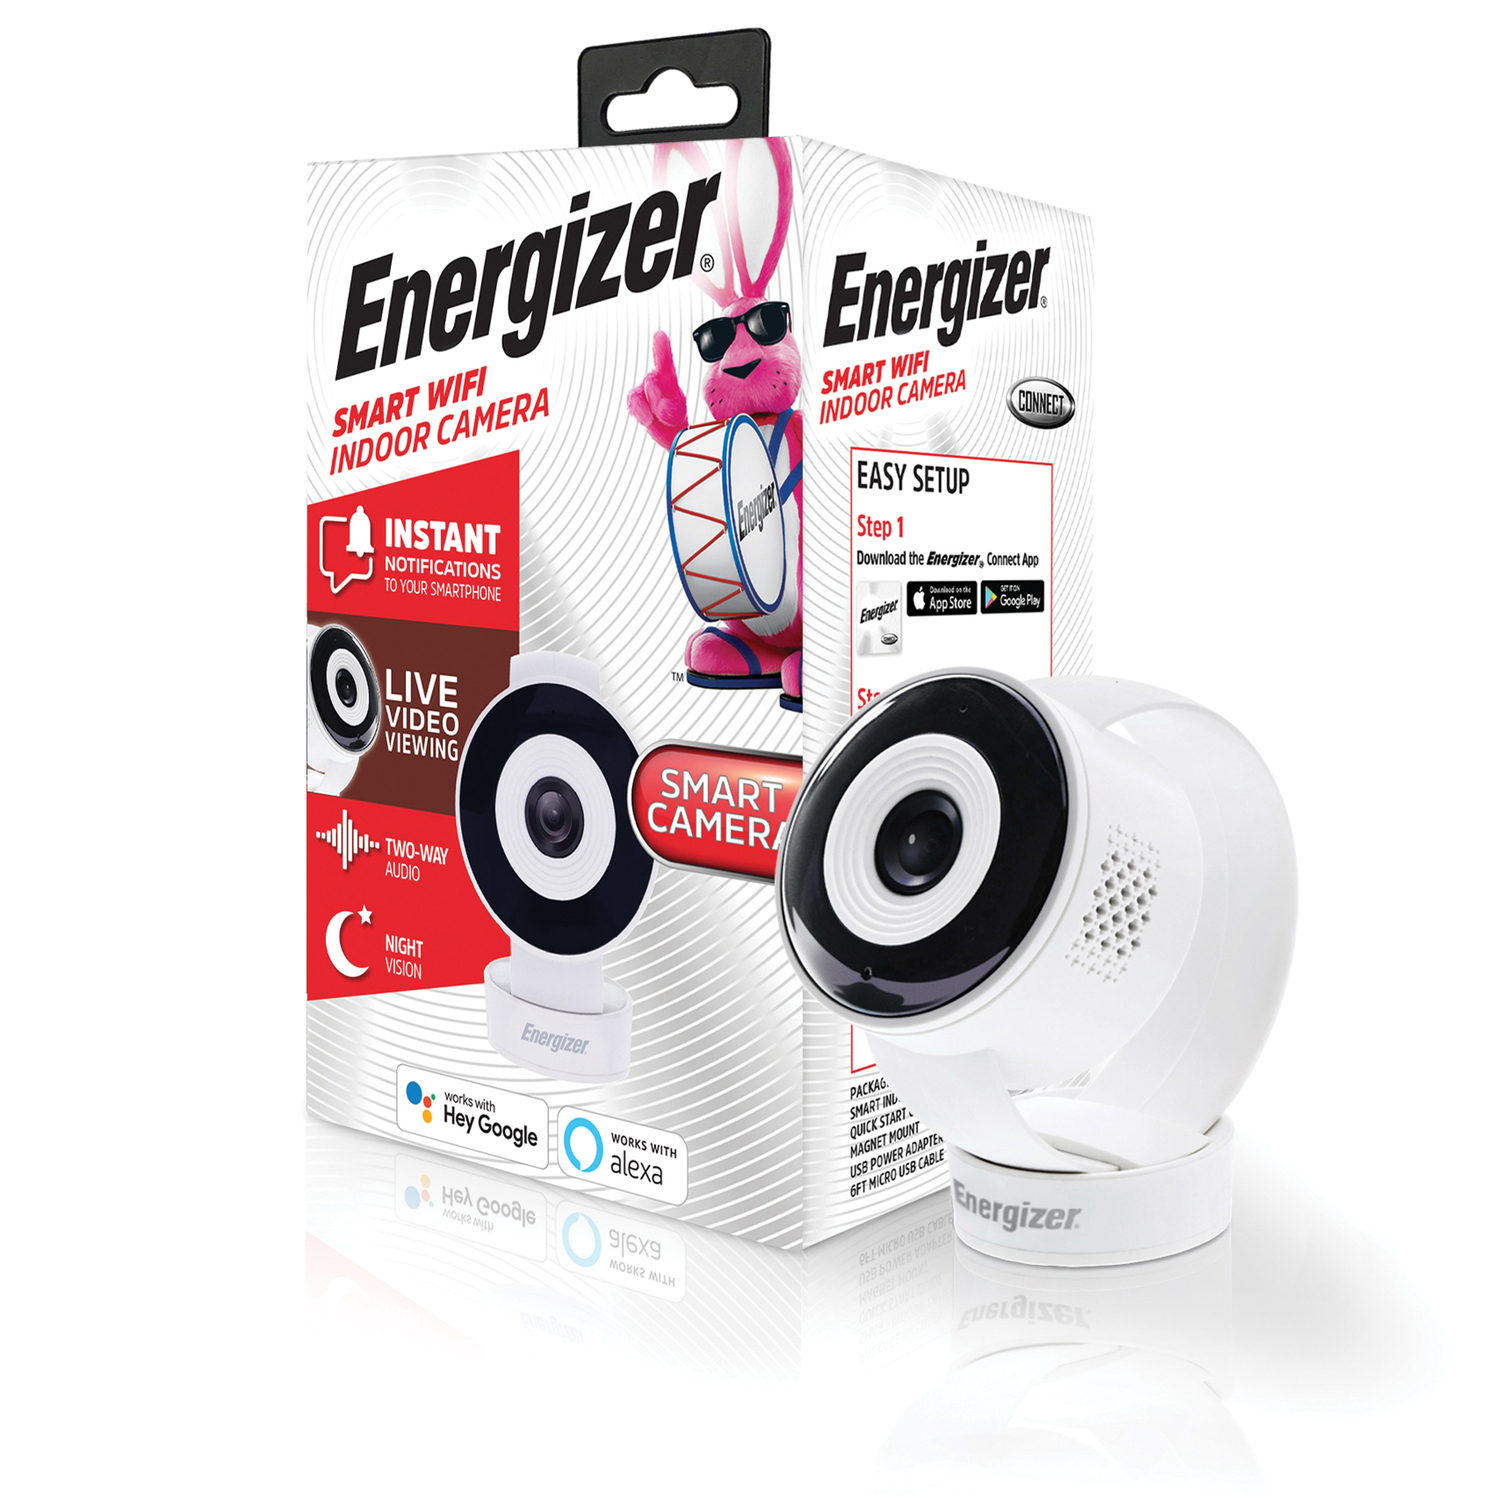 Energizer Smart Wi-Fi 720p Indoor Camera, White, Two Way Audio, Night Vision, Remote Access - image 1 of 10